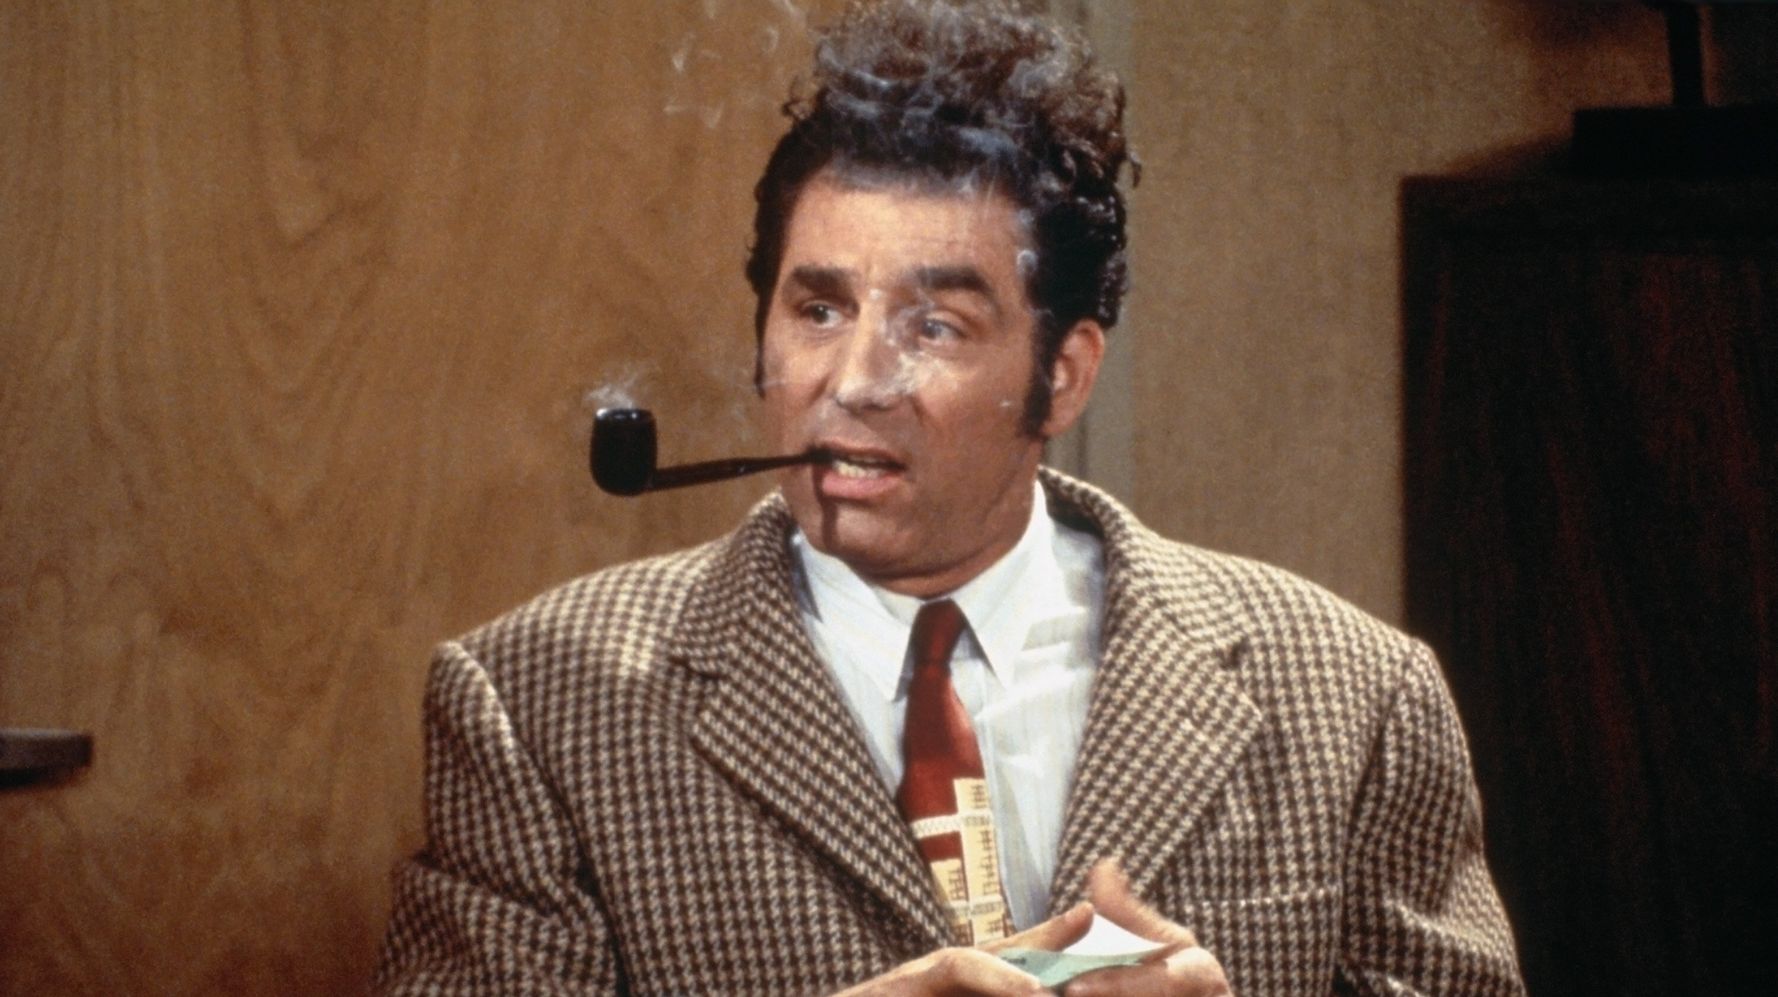 'Seinfeld' Writer Says These Days Kramer Would Be In Both QAnon And Antifa